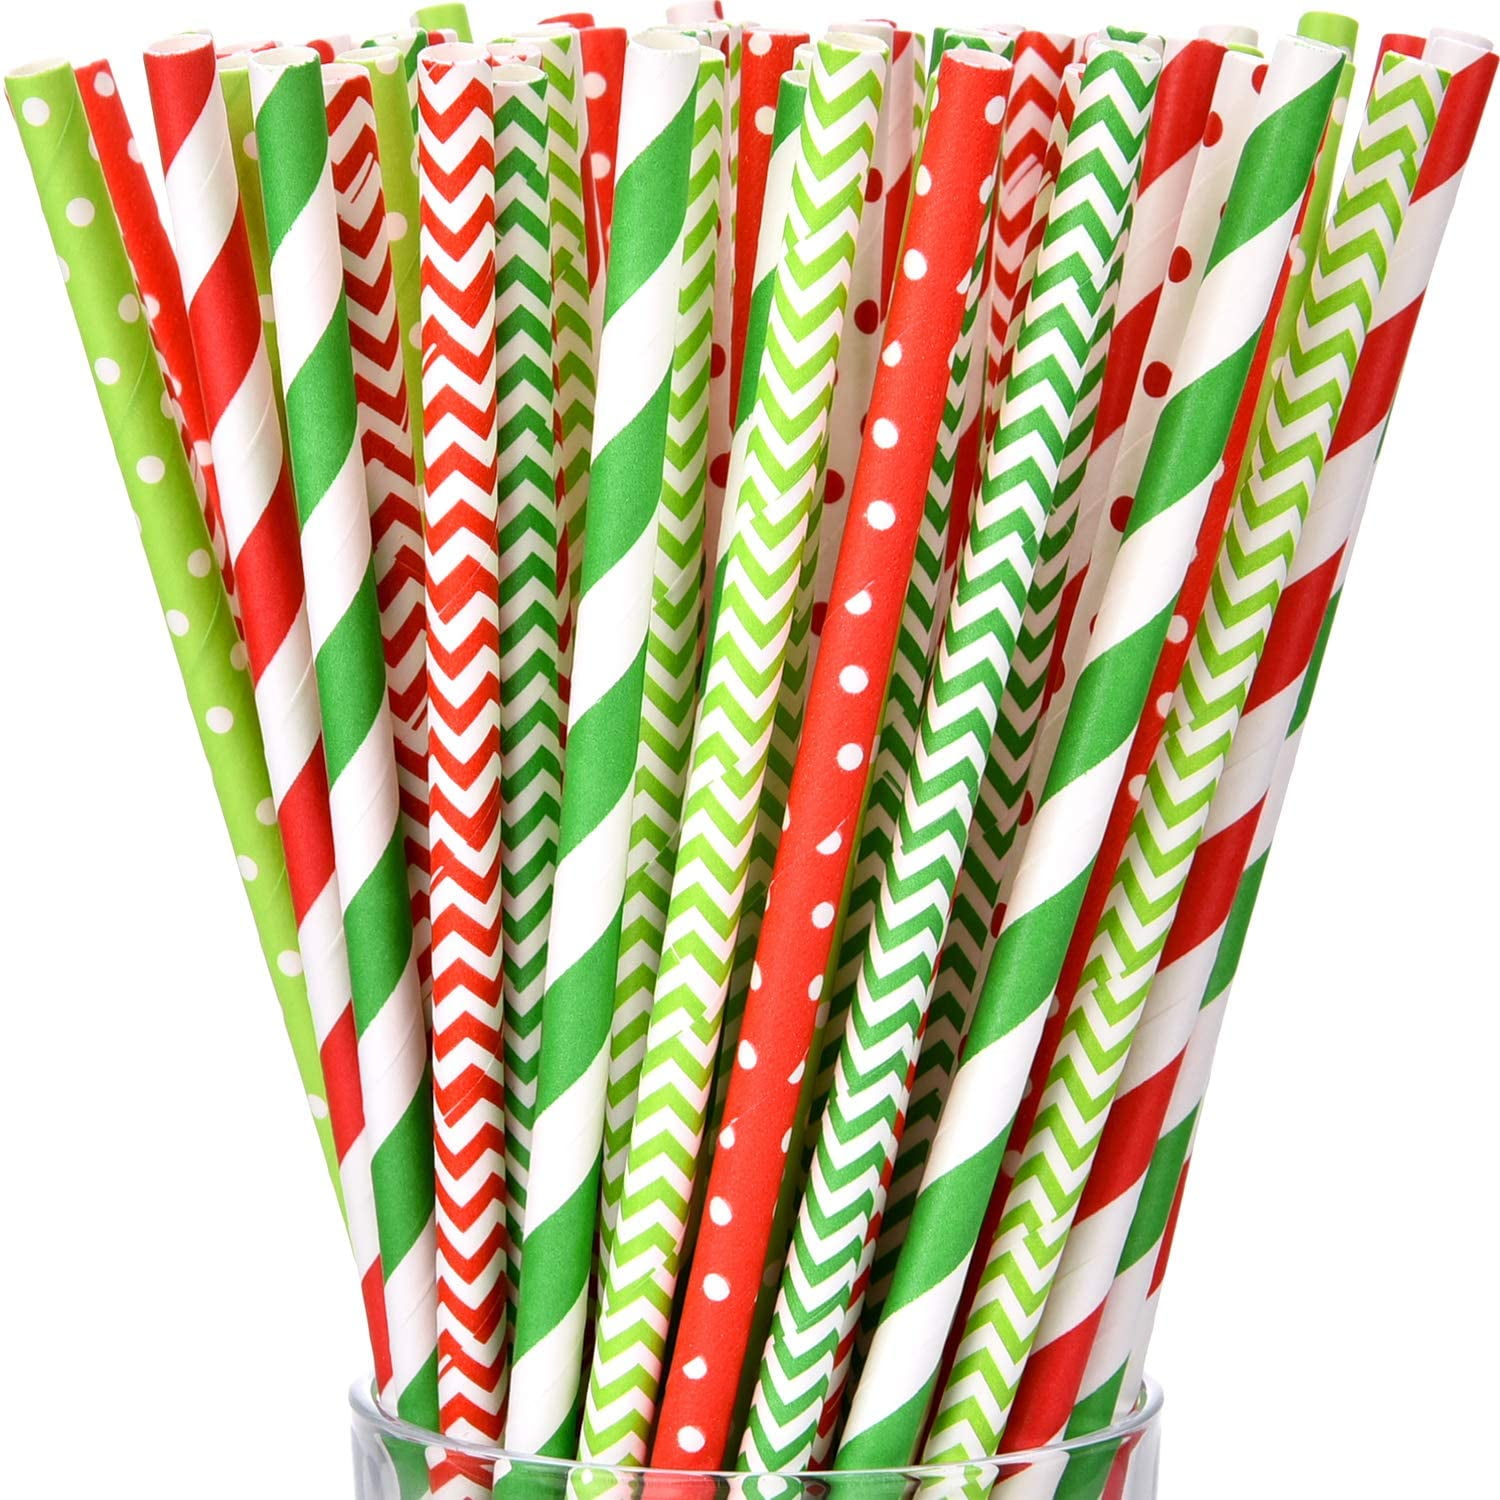 250 X Disposable Straws Paper Straws Stripy Straws Eco Friendly Biodegradable Drinking Straws 8 RED Choose Color